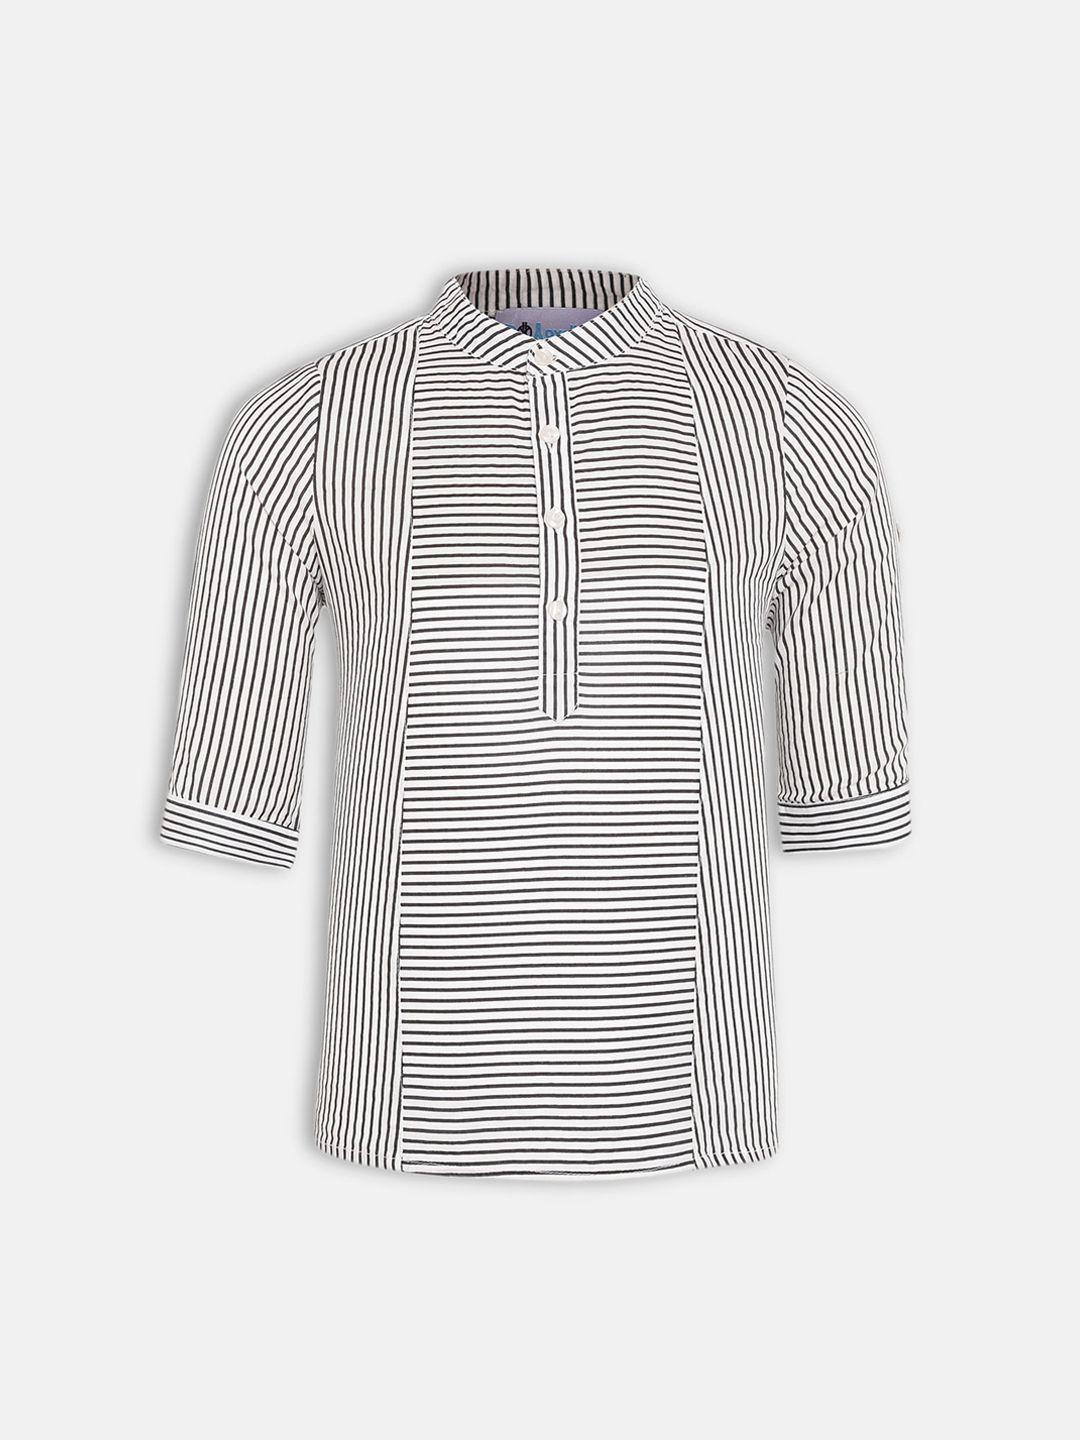 oxolloxo-boys-grey-and-black-striped-casual-shirt